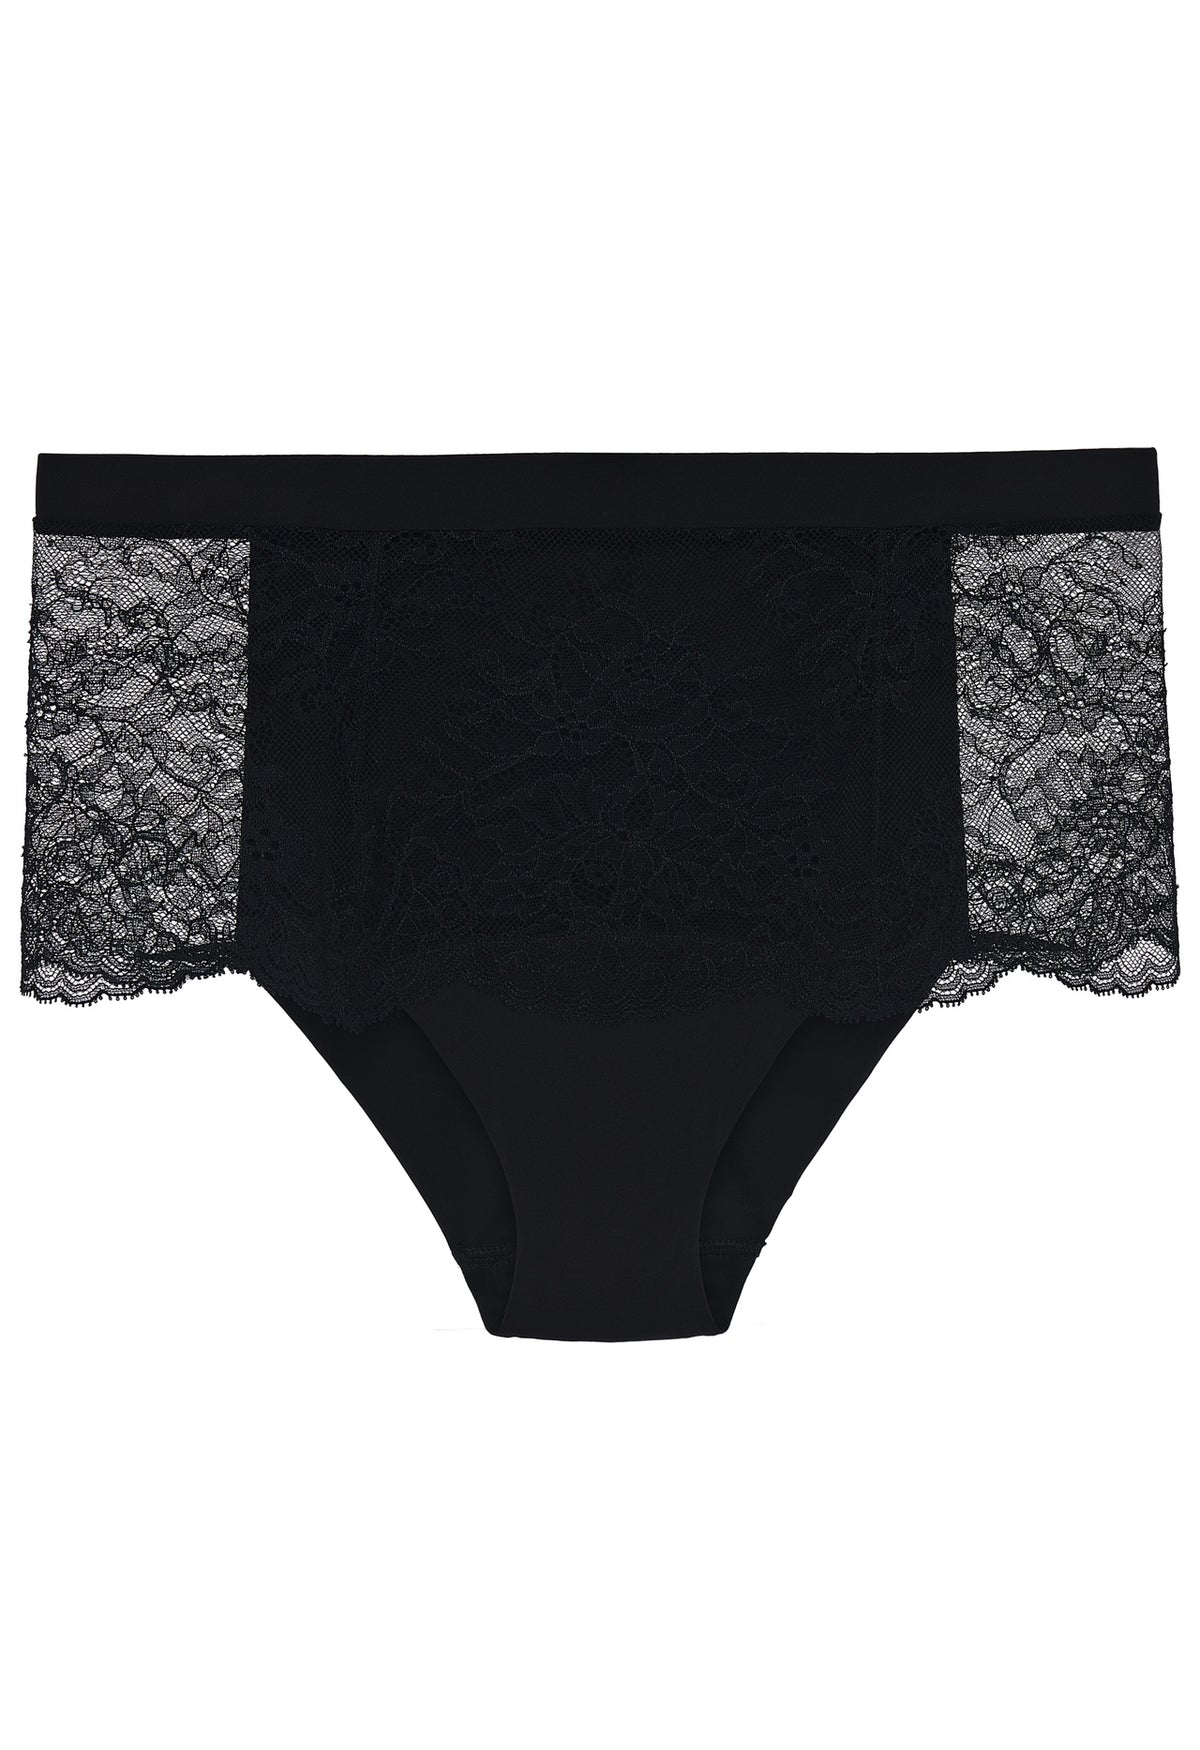 Black Leavers lace high-waisted brief – Vantage - Clean